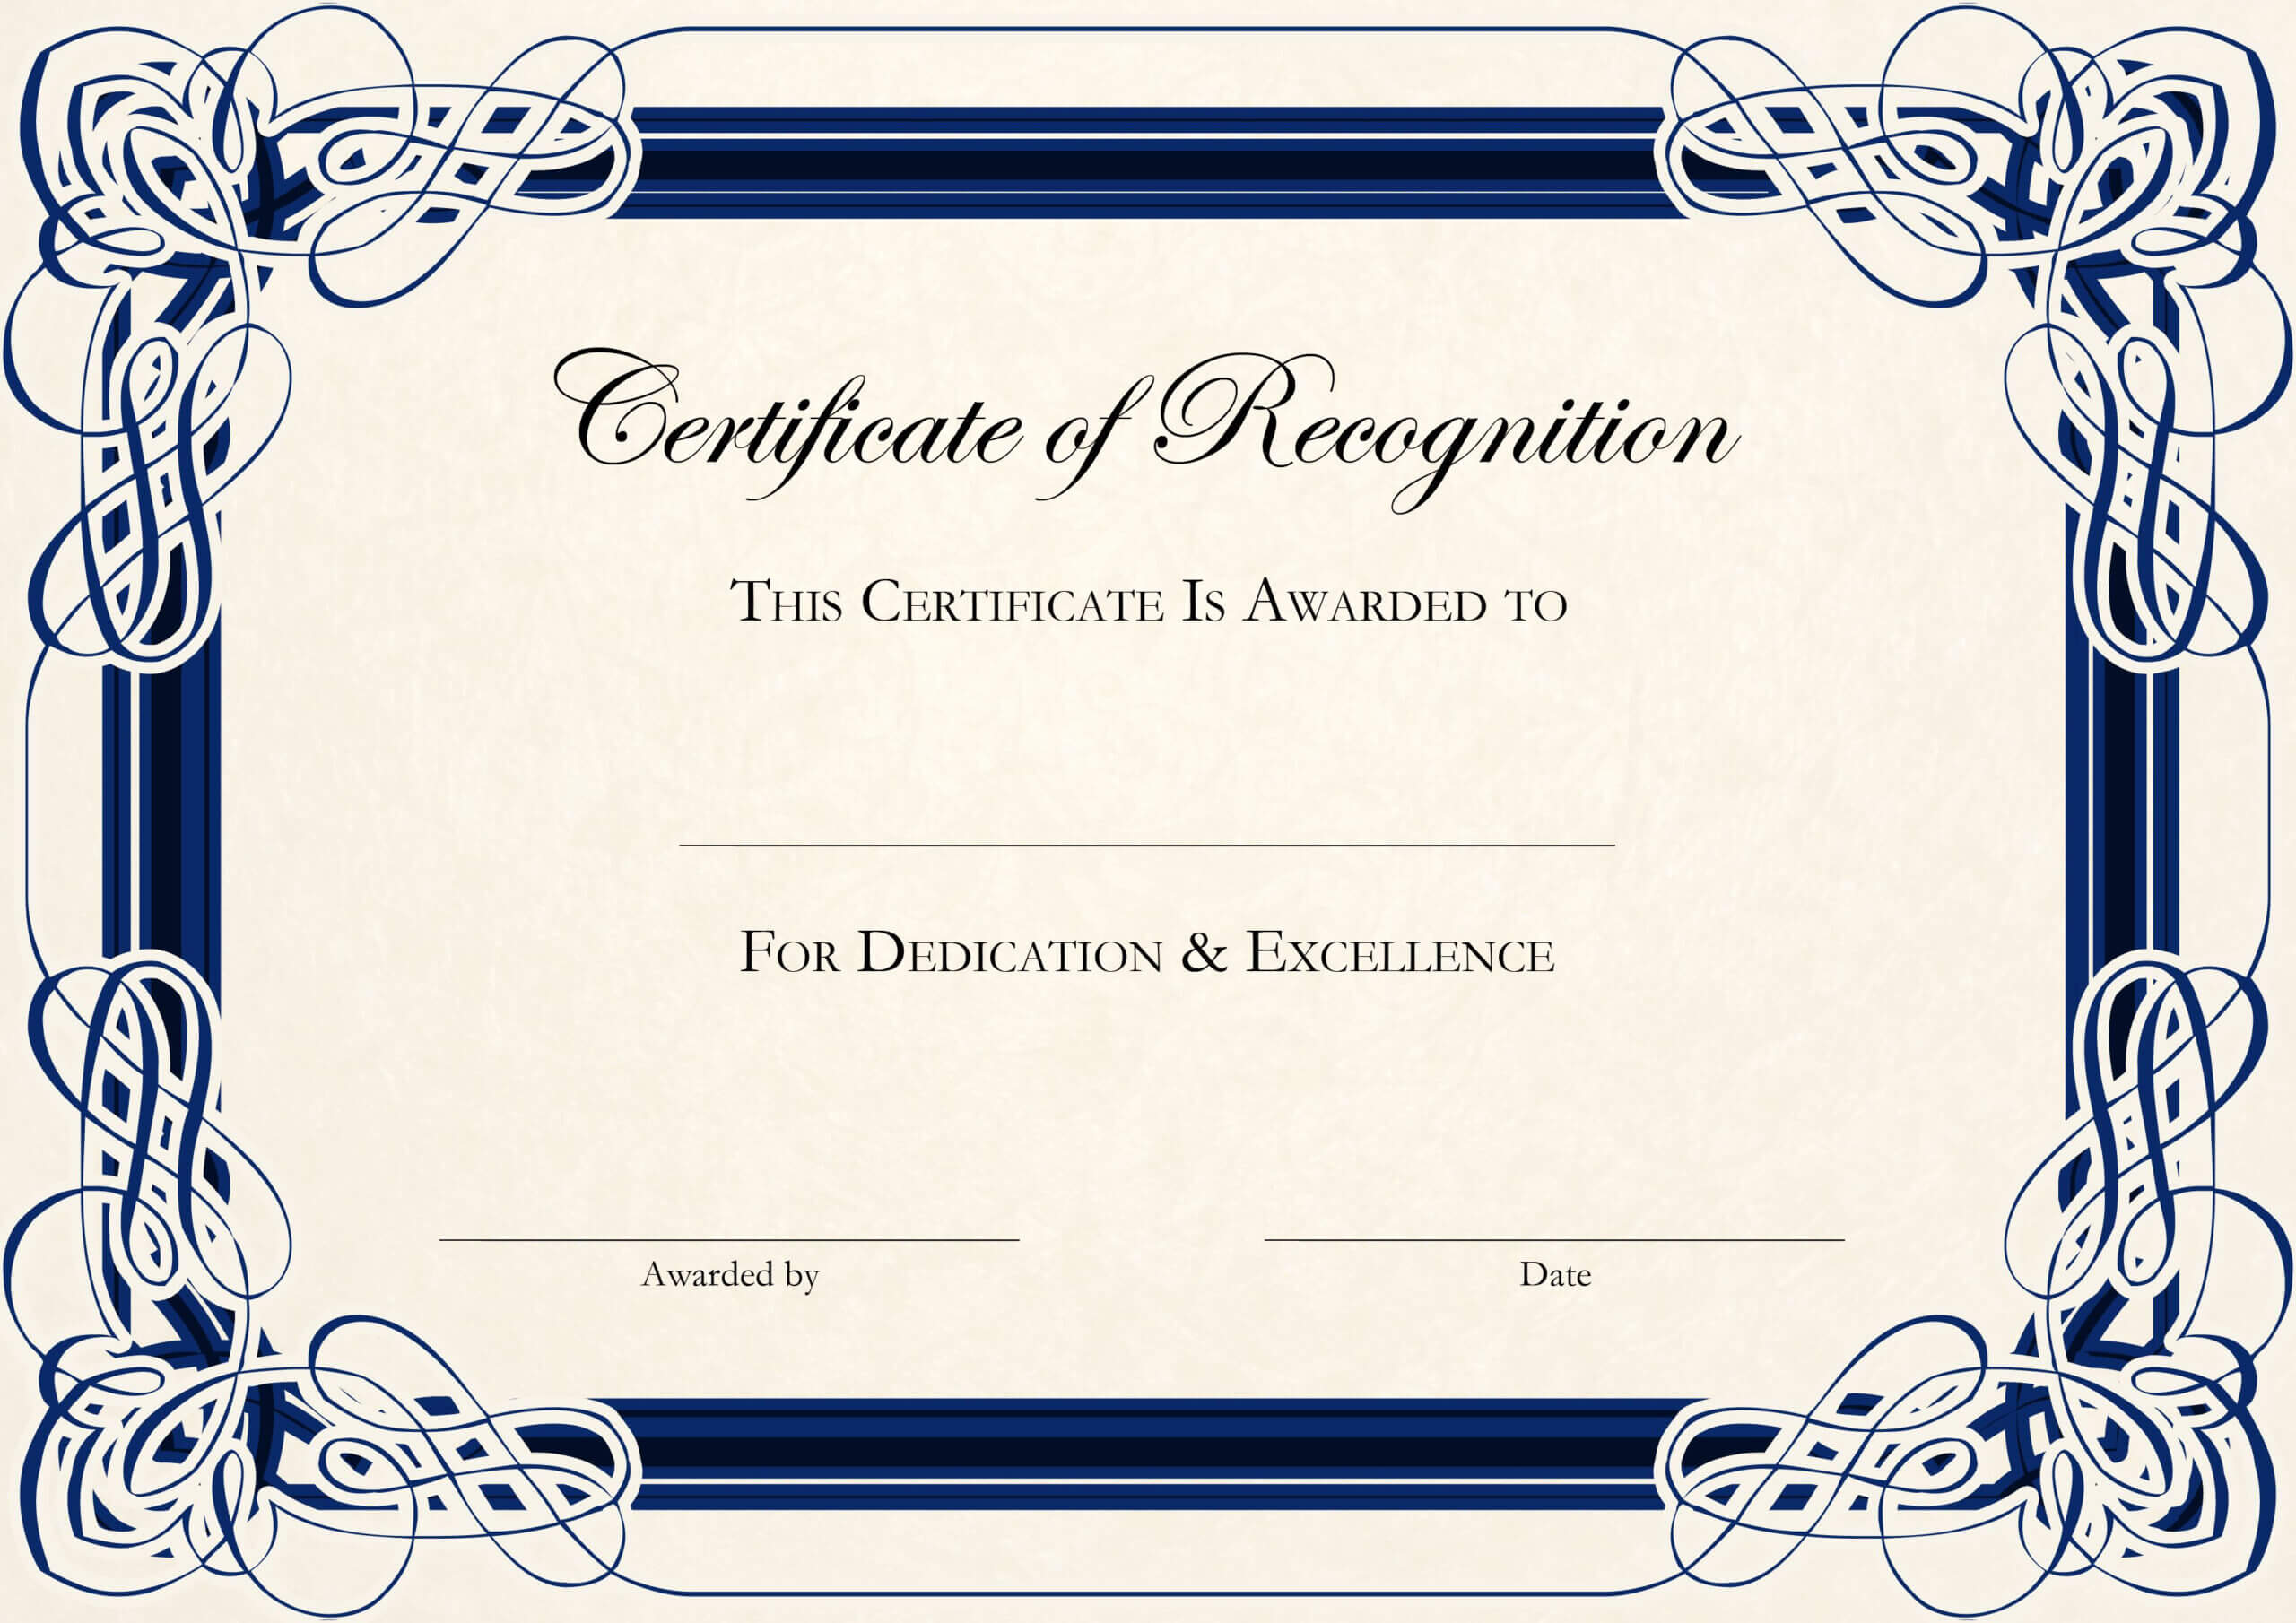 Sports Cetificate | Certificate Of Recognition A4 Thumbnail Within Printable Certificate Of Recognition Templates Free